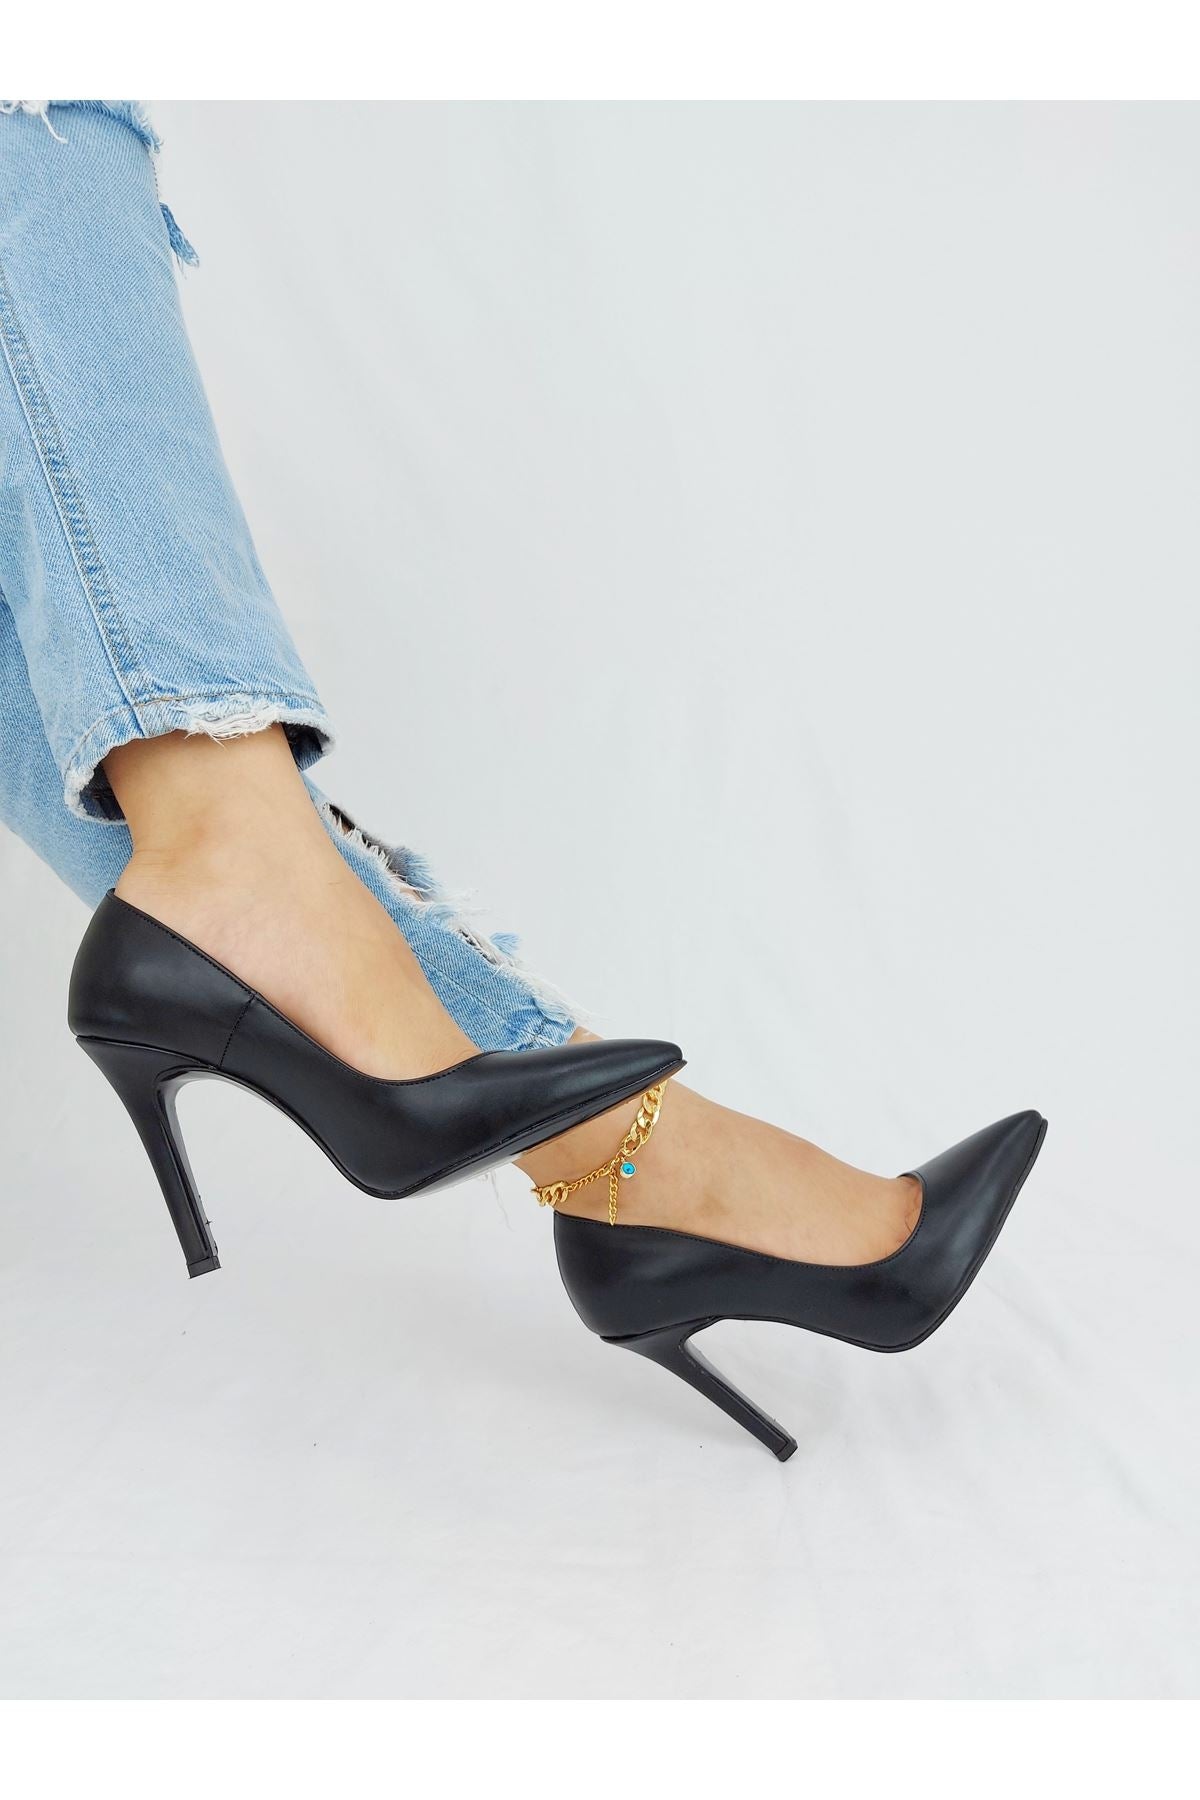 Image of Women's Black Leather Stiletto Shoes